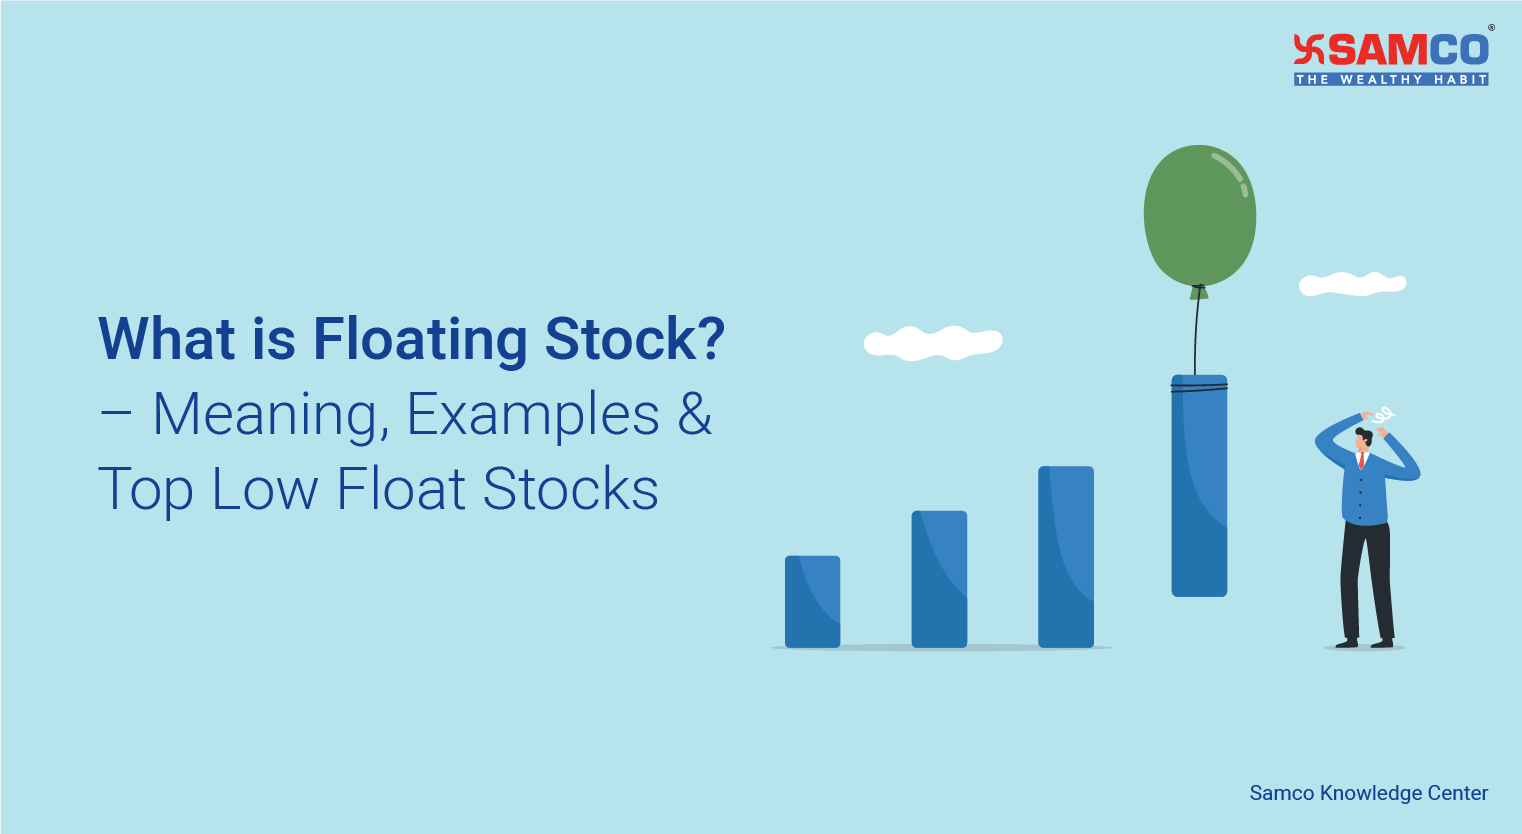 What is Floating Stock